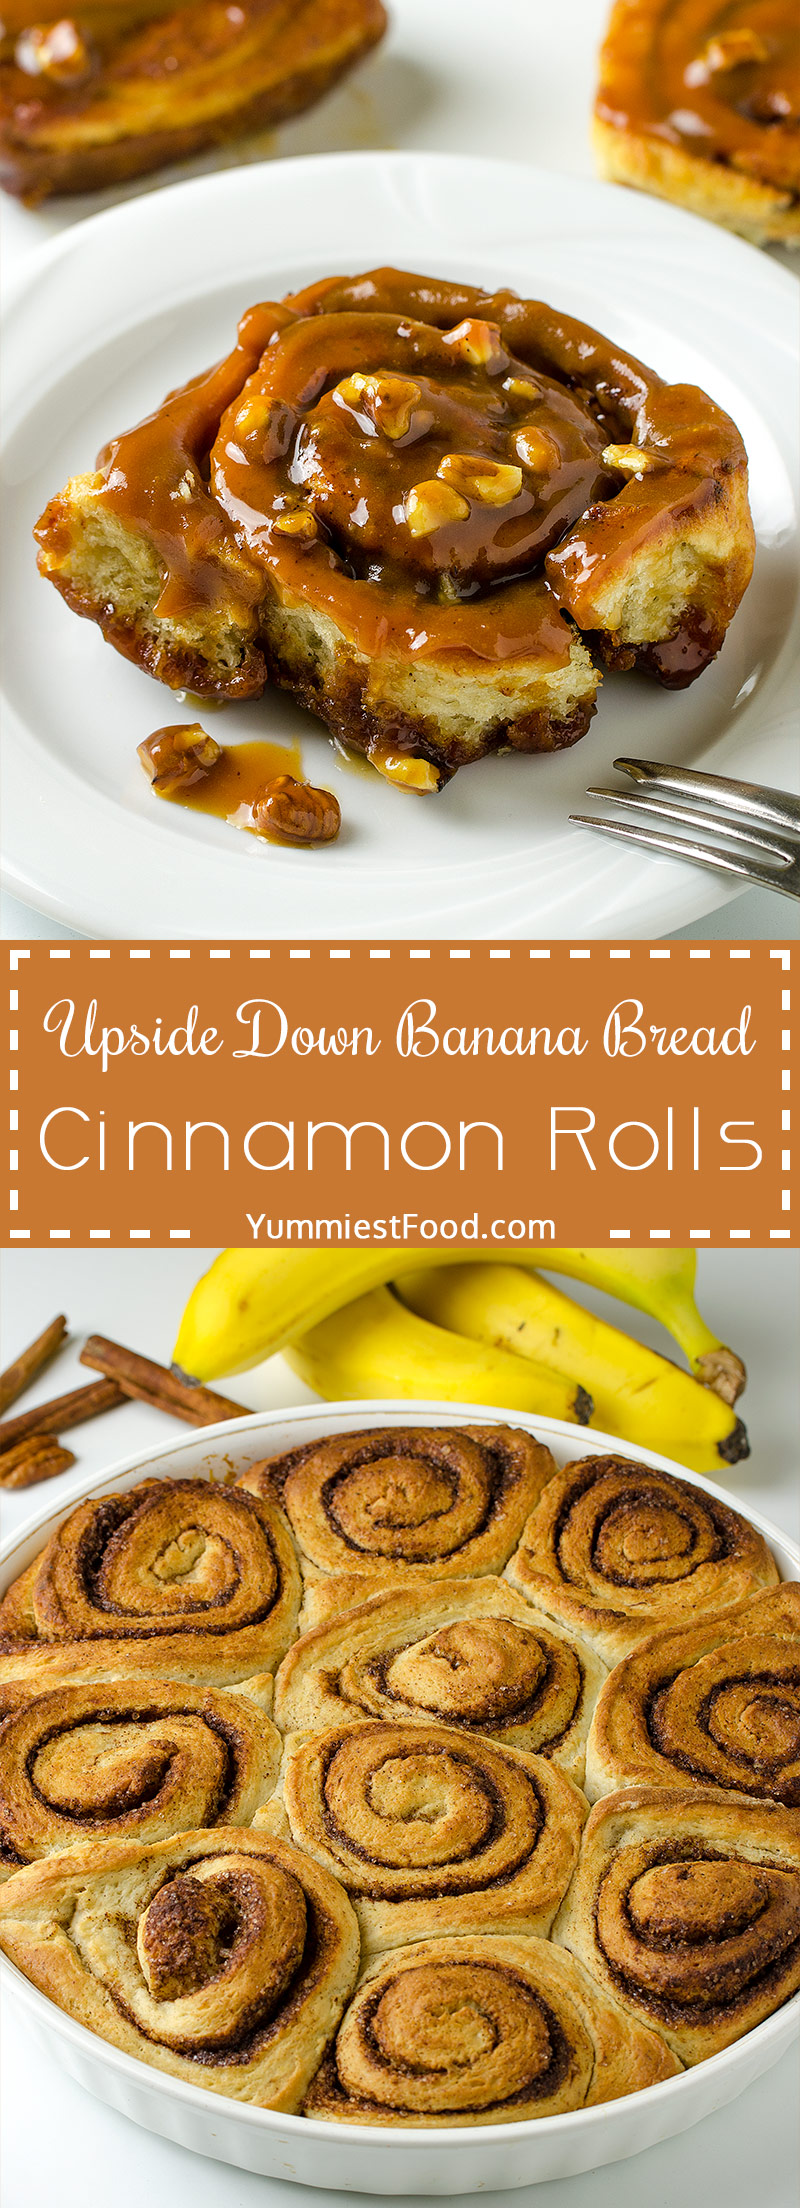 HOMEMADE UPSIDE DOWN BANANA BREAD CINNAMON ROLLS - baked upside down and covered in a decadent caramel glaze and pecan